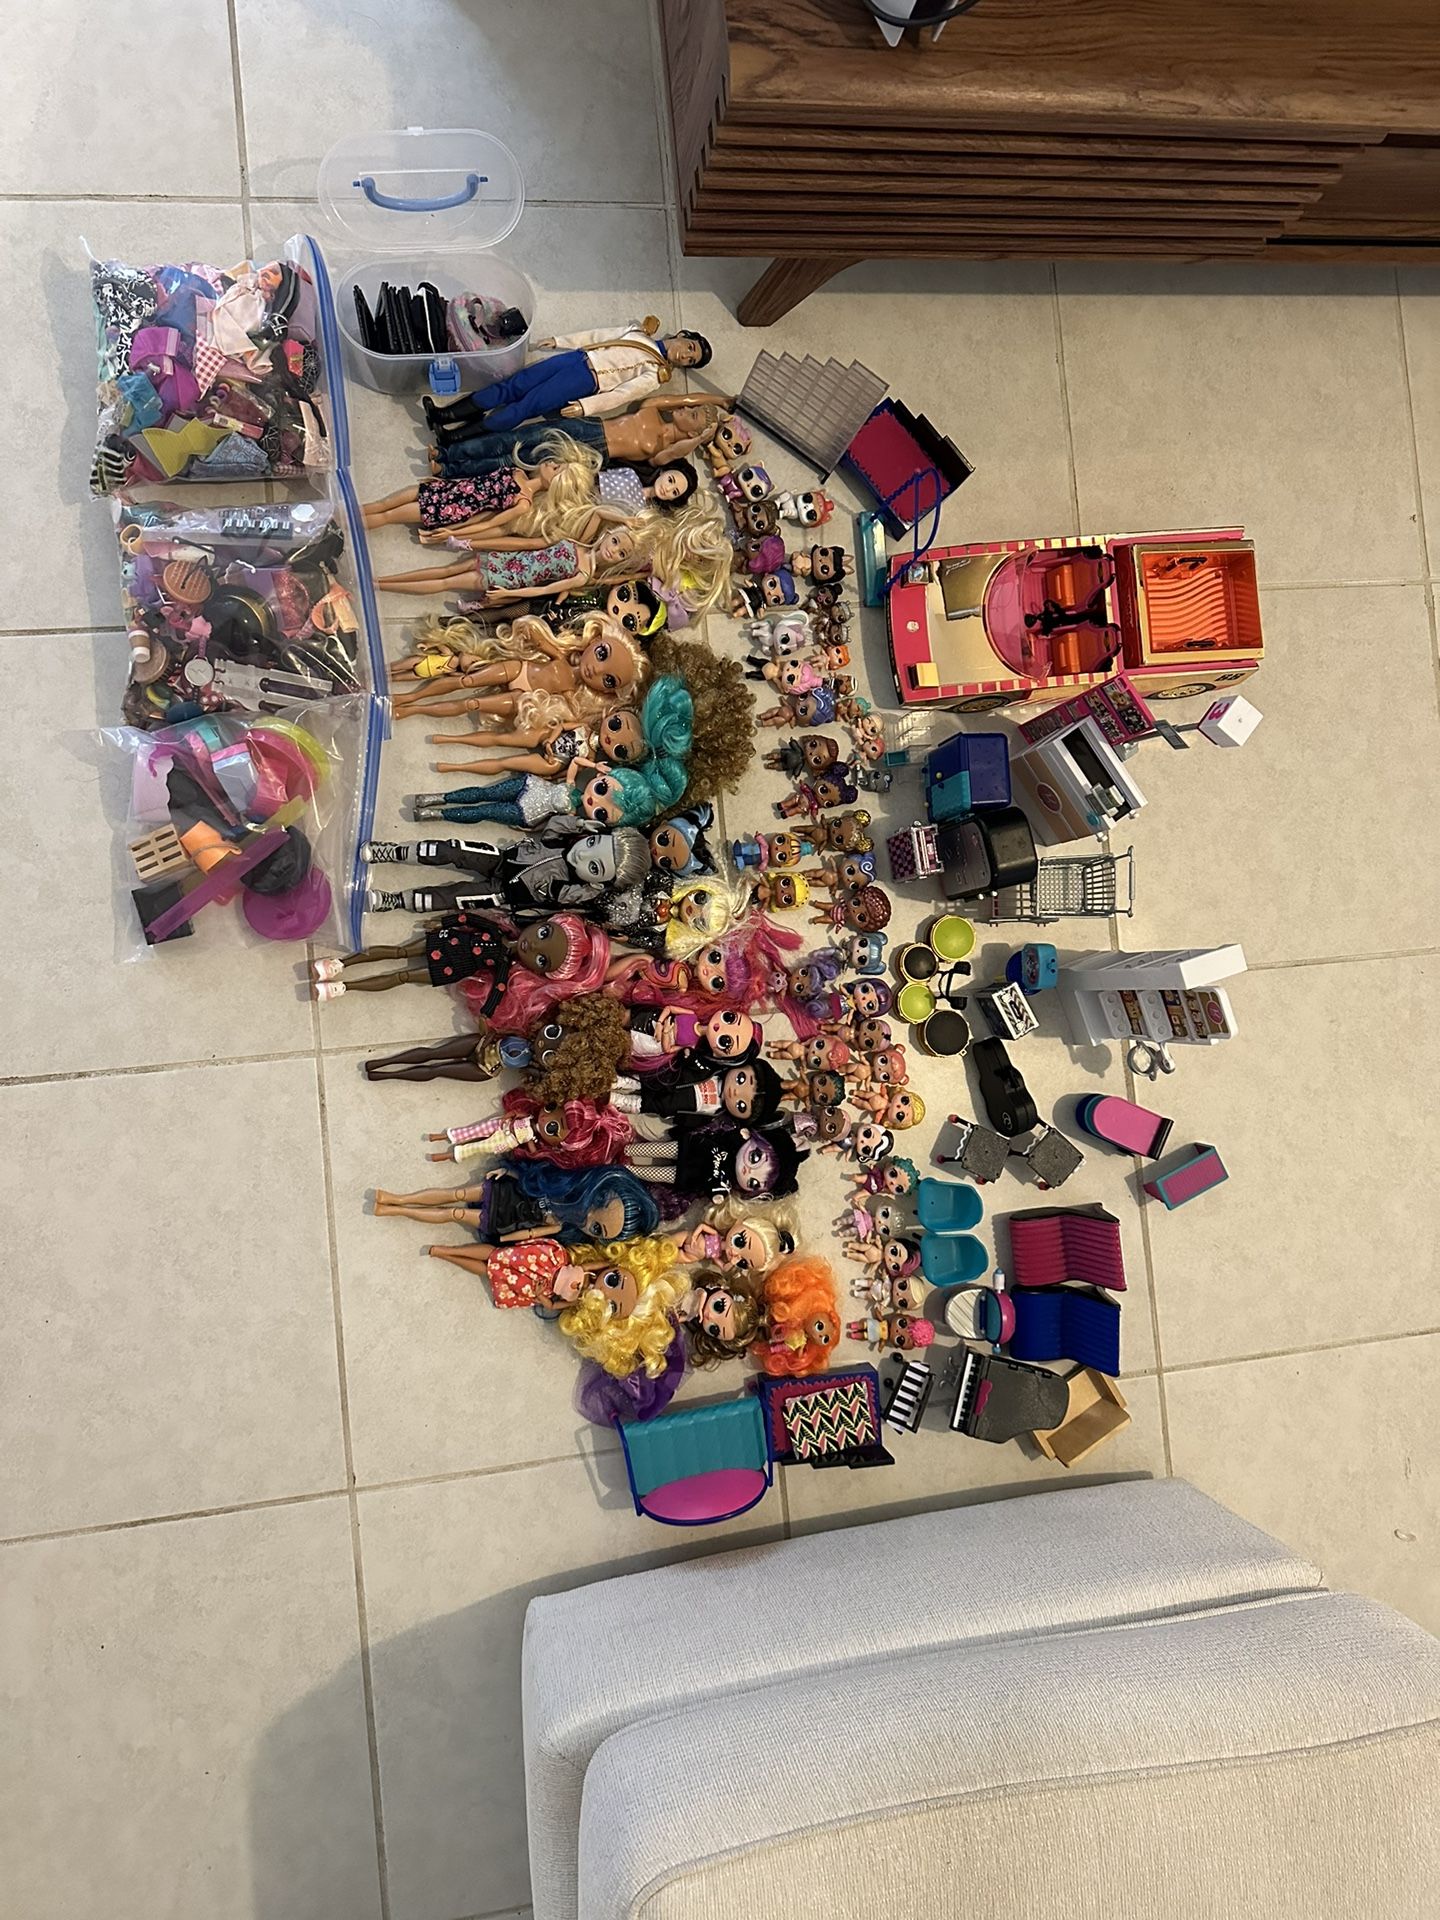 Huge Lot Of LOL Dolls And Accessories 